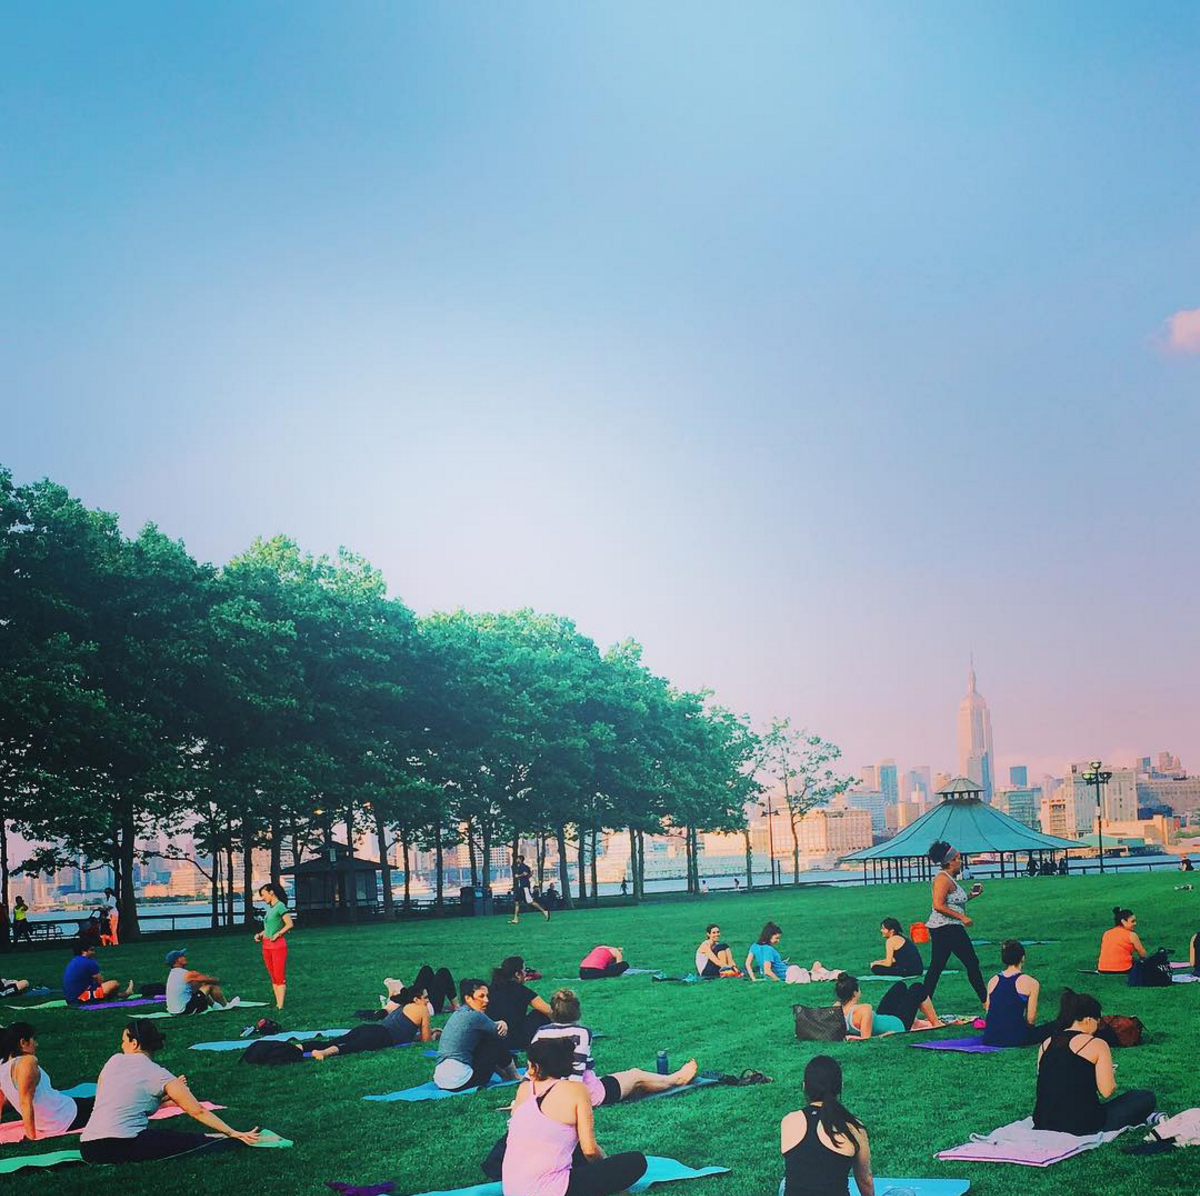 yoga-in-the-park